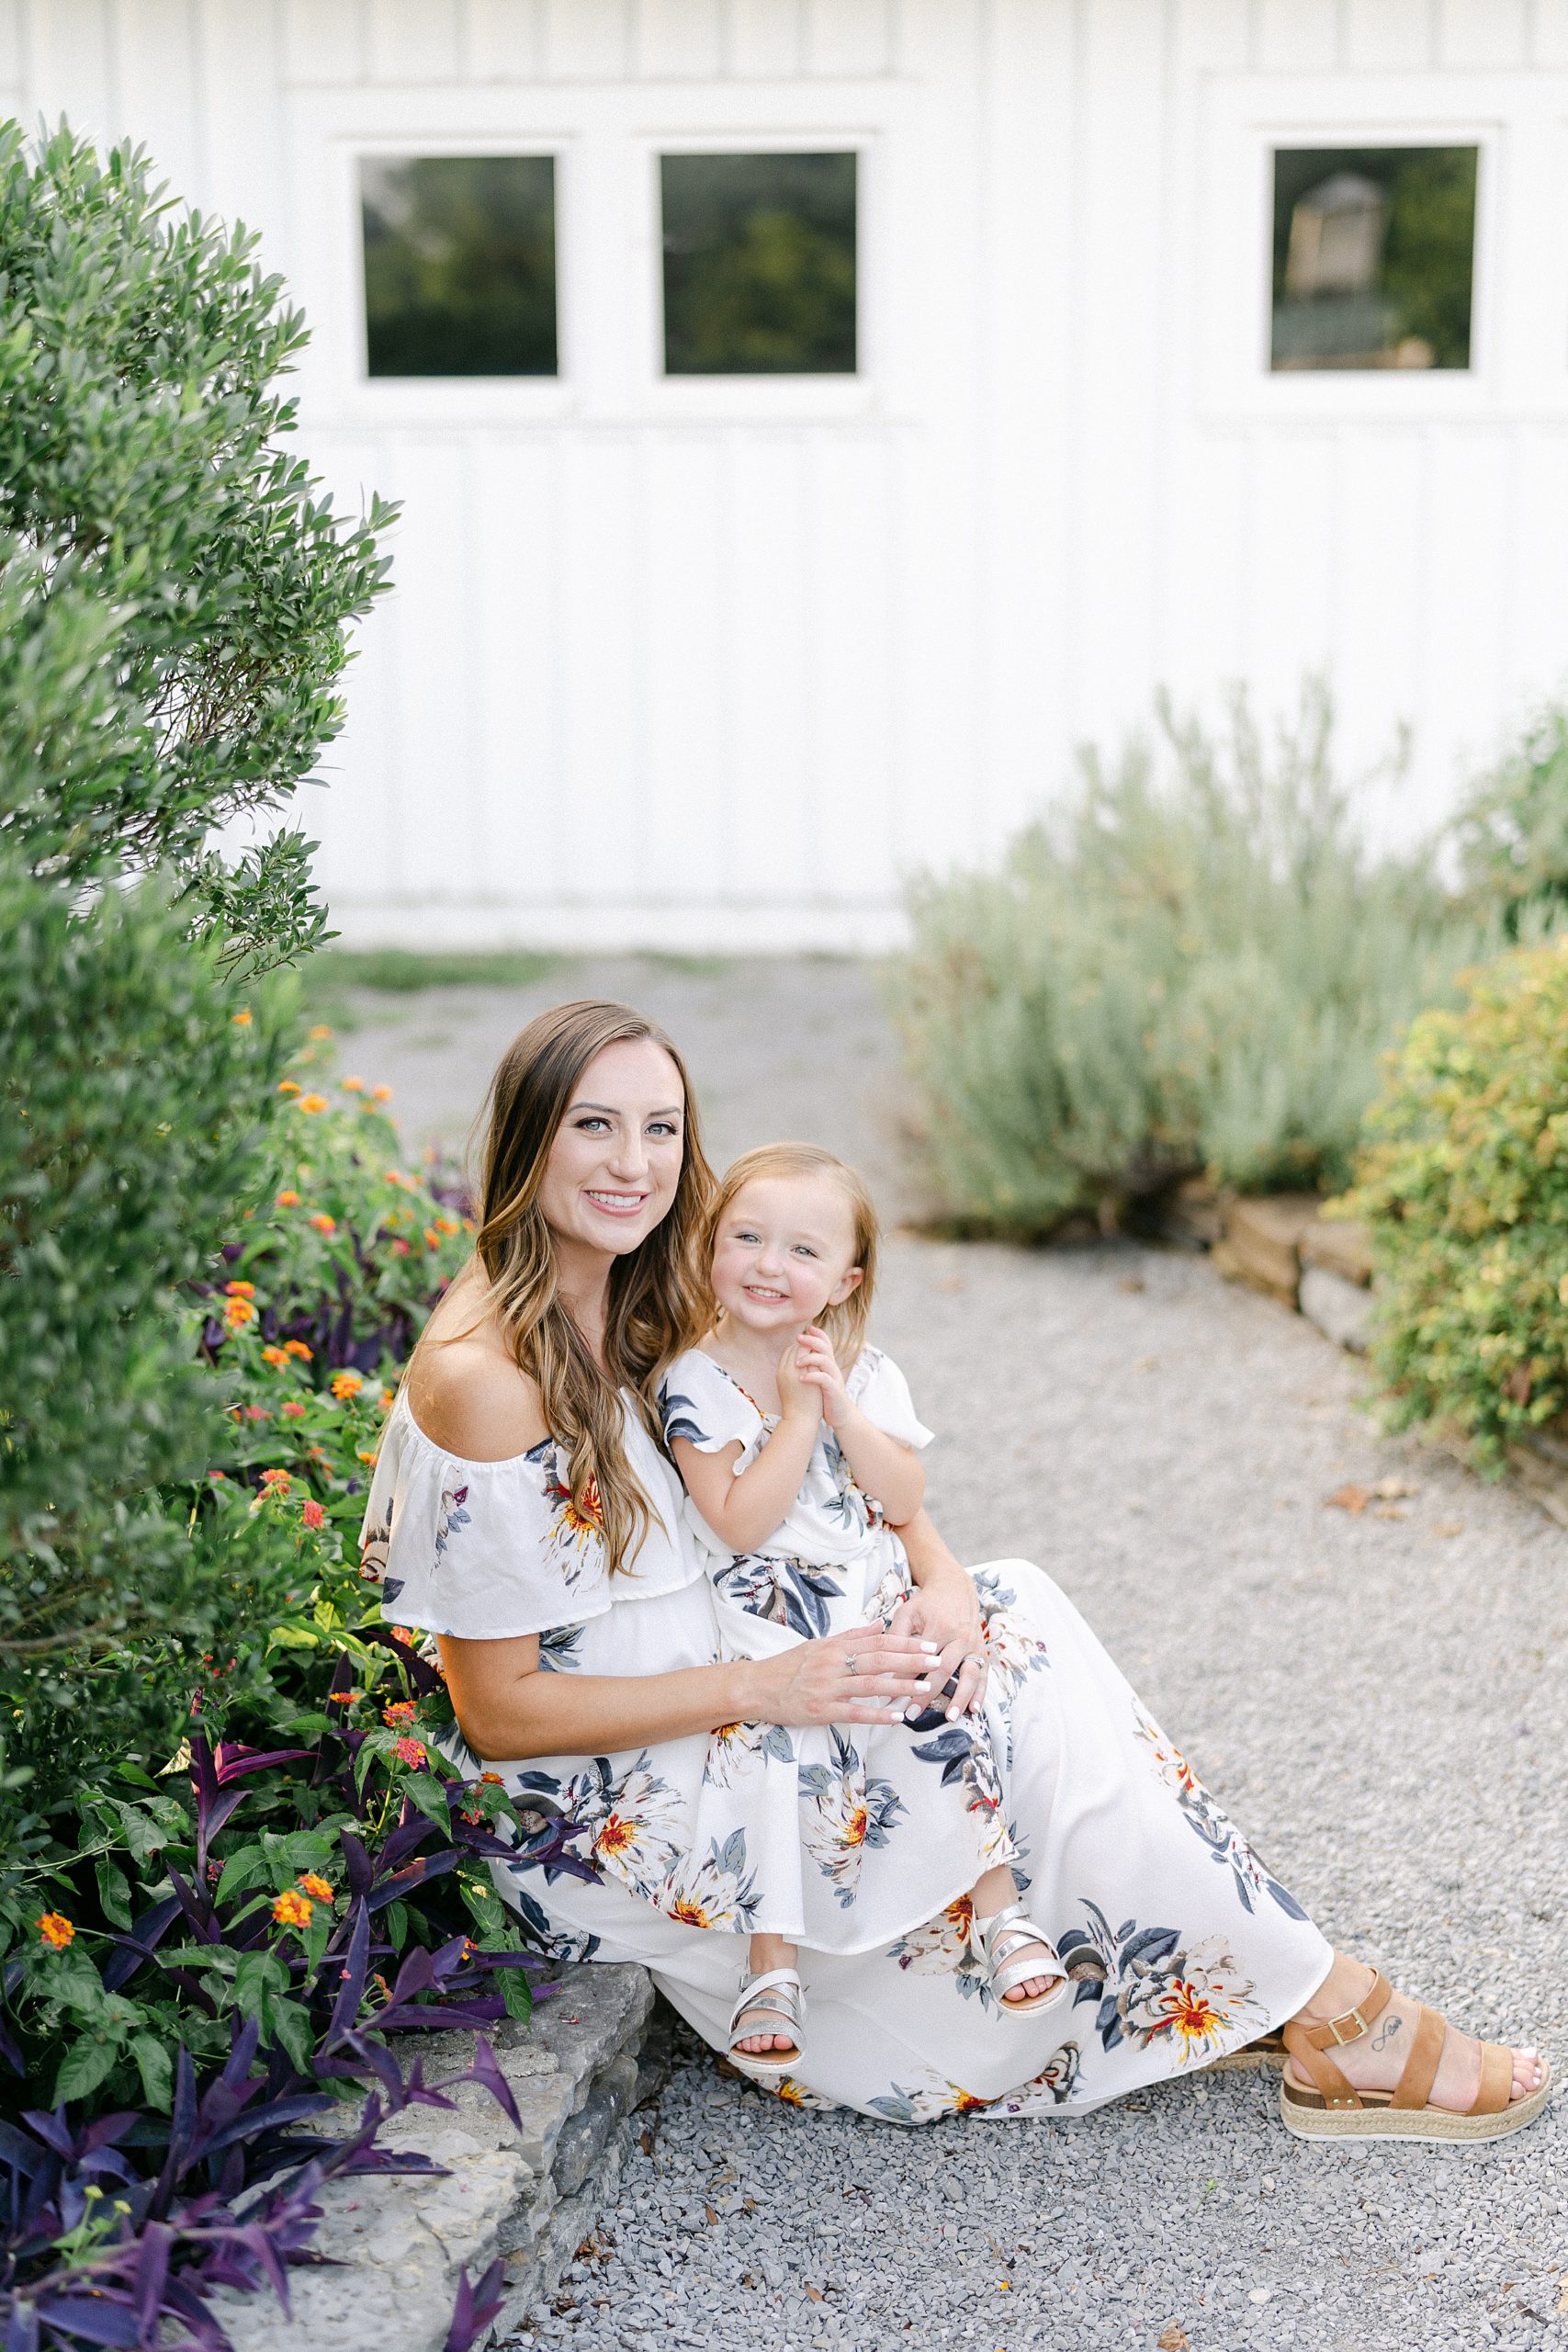 Nashville Mom and Me session with adorable girl smiling